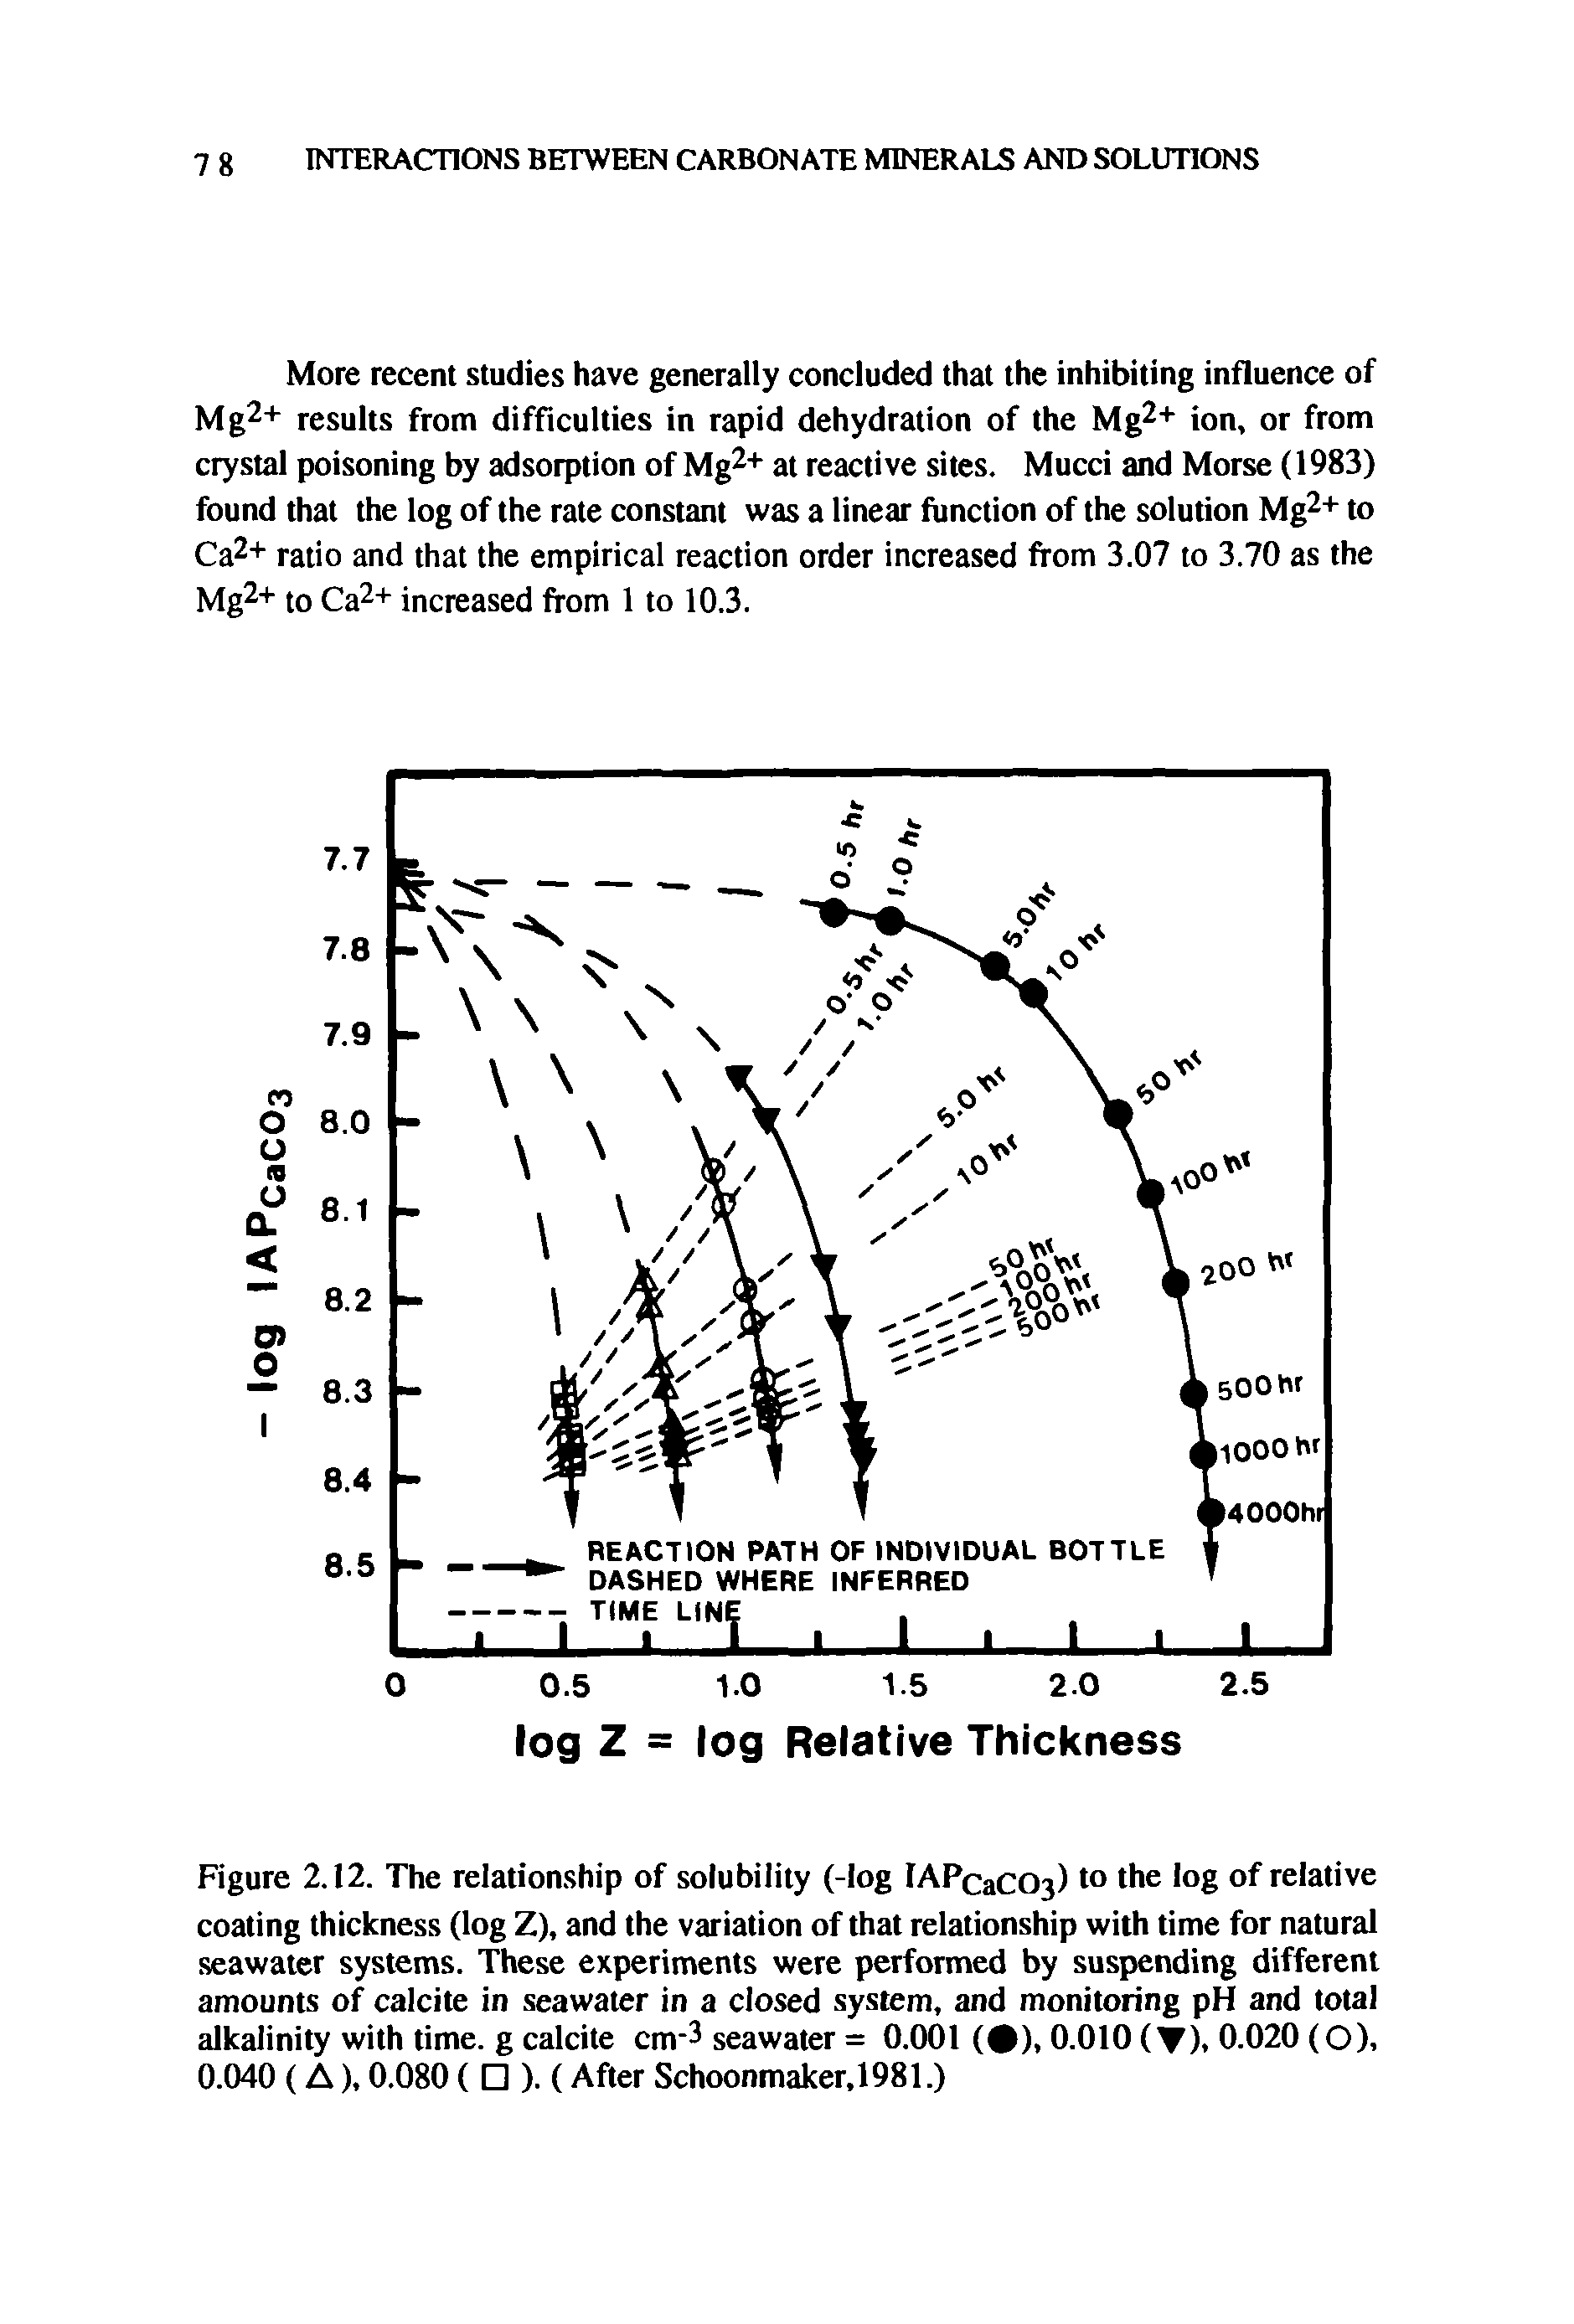 Figure 2.12. The relationship of solubility (-log lAPcaCC ) to the log of relative coating thickness (log Z), and the variation of that relationship with time for natural seawater systems. These experiments were performed by suspending different amounts of calcite in seawater in a closed system, and monitoring pH and total alkalinity with time, g calcite cm-3 seawater = 0.001 ( ), 0.010 ( ), 0.020 (O), 0.040 (A), 0.080 ( ). (After Schoonmaker,1981.)...